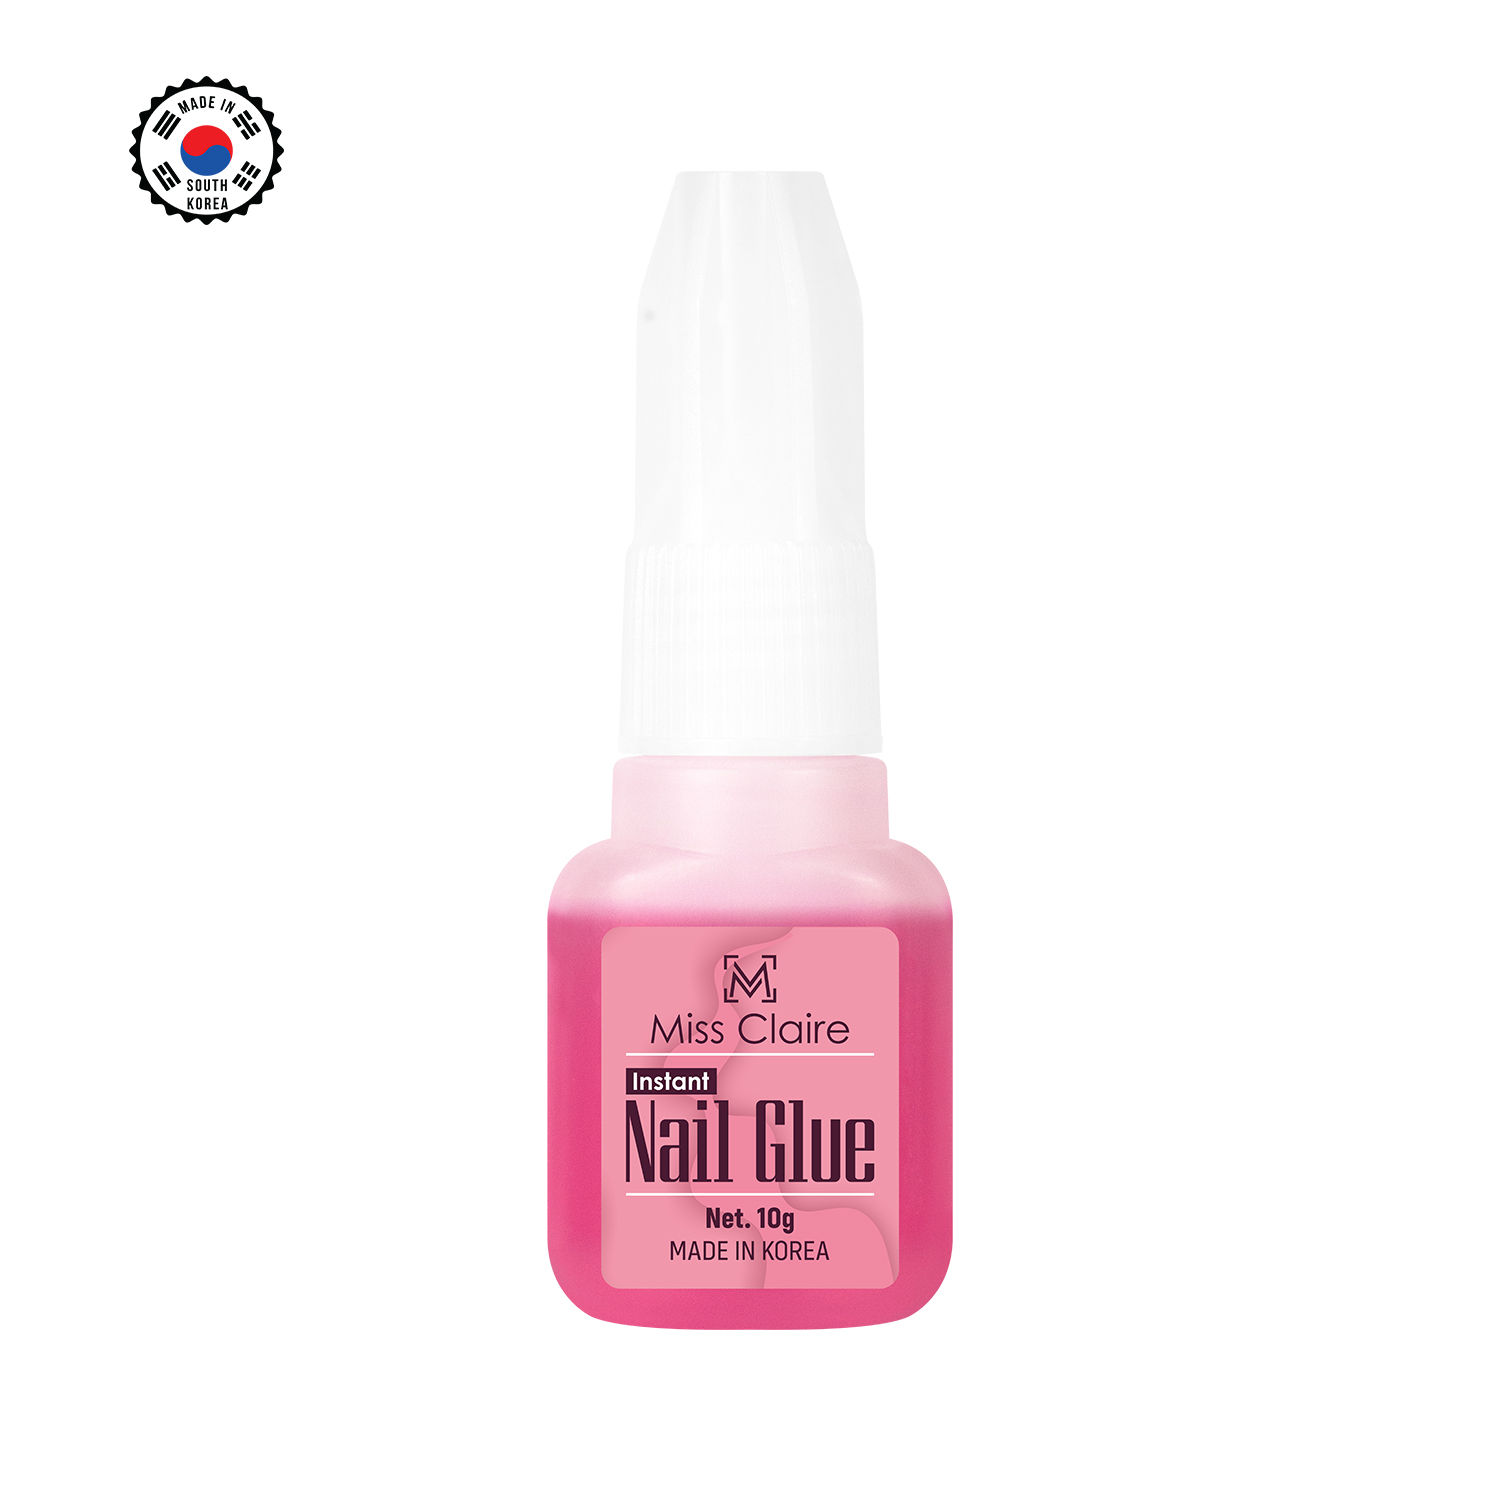 Miss Claire Nails Glue Reviews Online | Nykaa